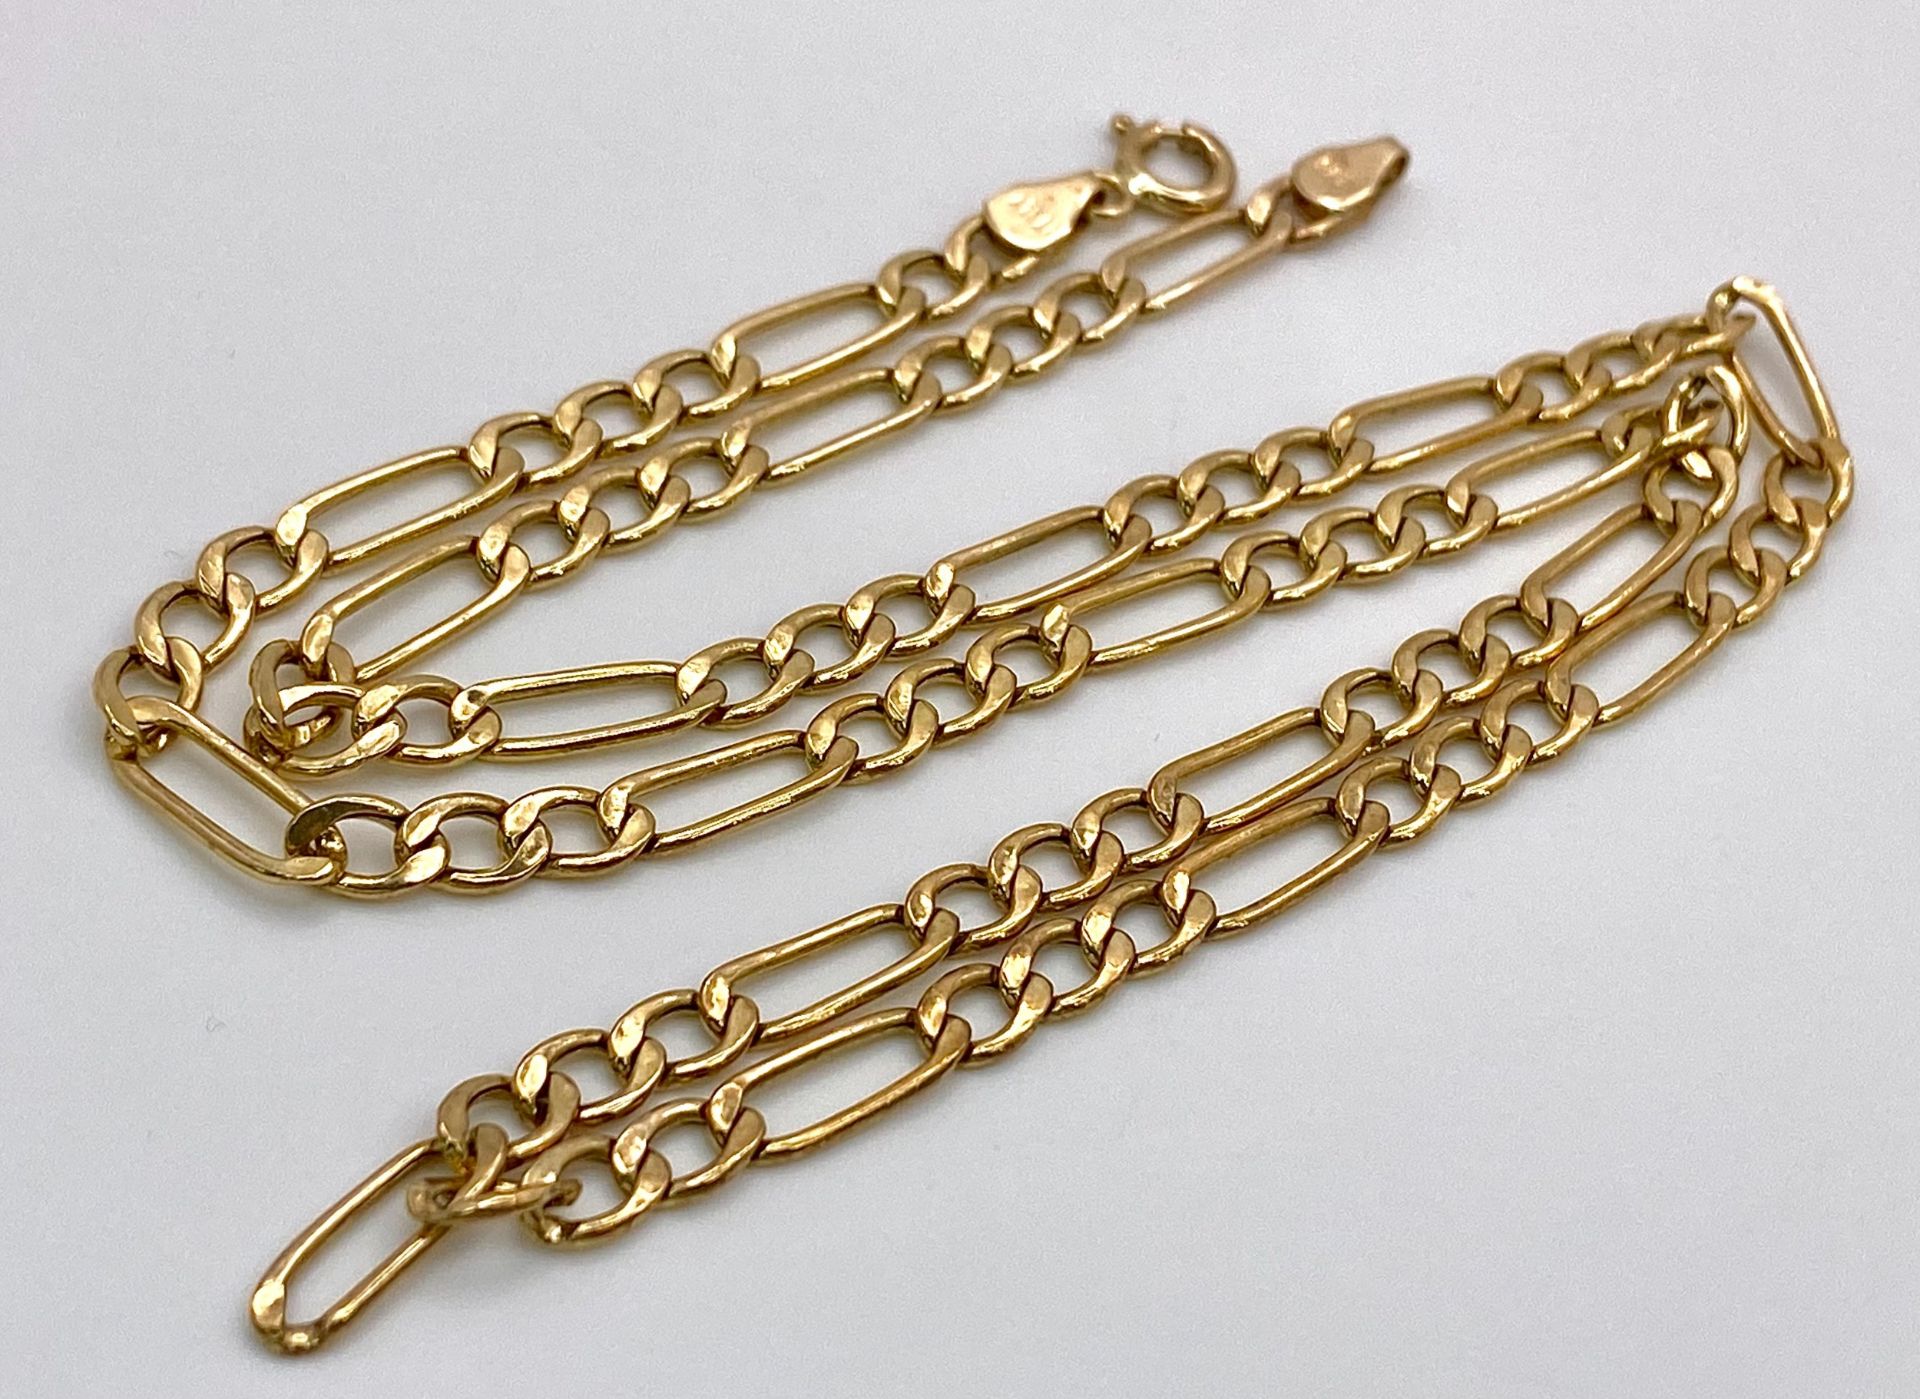 A 9K Yellow Gold Figaro Link Chain/Necklace. 46cm. 4.4g weight. - Image 2 of 6